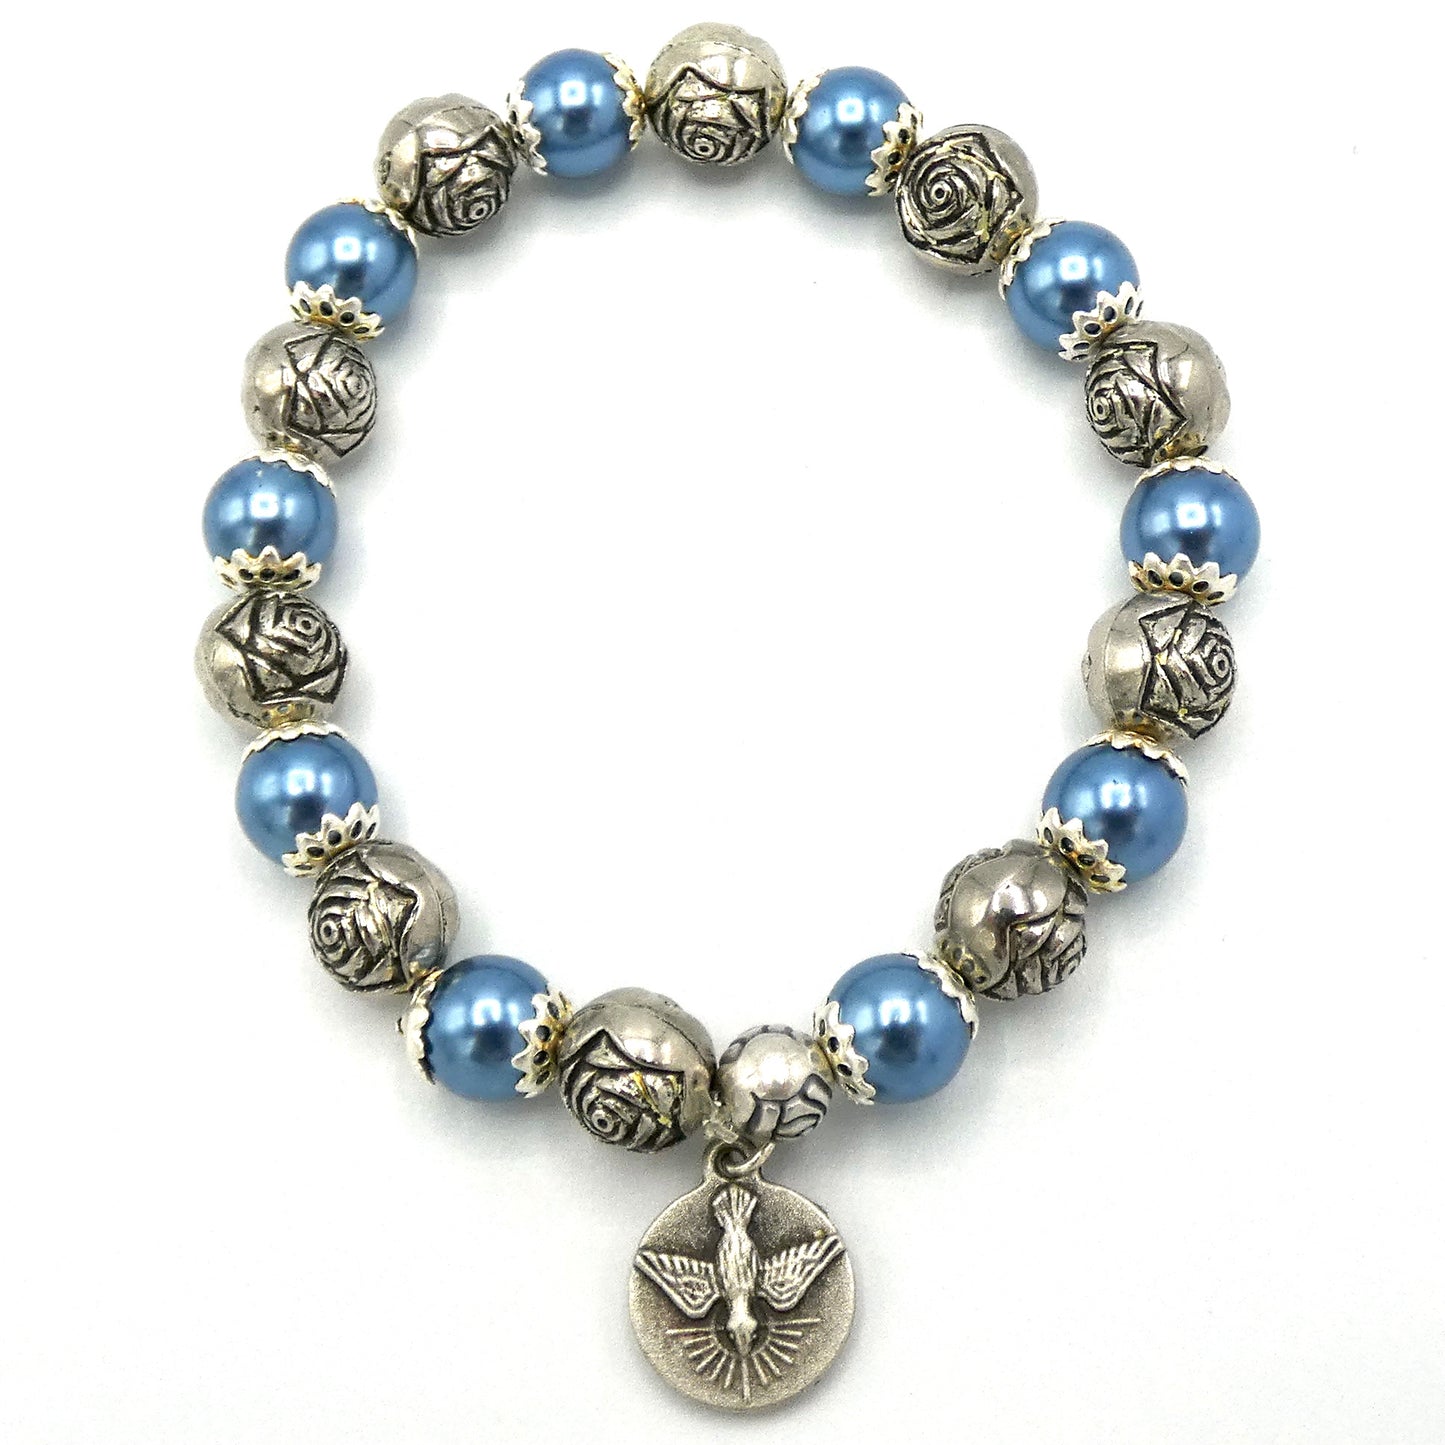 Pearl and Rose Lourdes Decade Rosary Bracelet of Assorted Colors